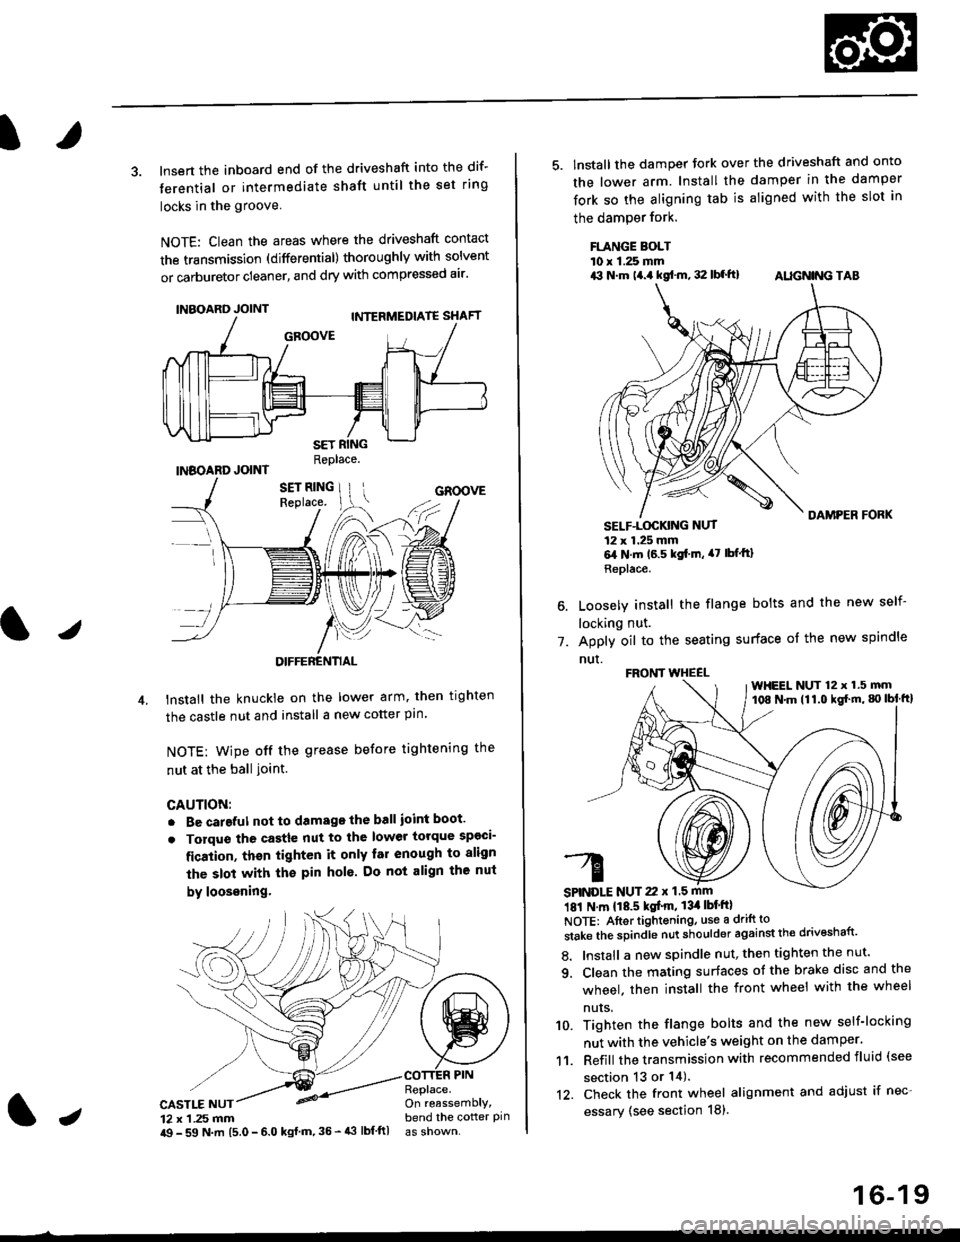 HONDA CIVIC 1996 6.G User Guide 3. lnsert the inboard end of the driveshaft into the dif-
terential or intermediate shaft until the set ring
locks in the groove
NOTE: Clean the areas where the driveshaft contact
the transmission (di